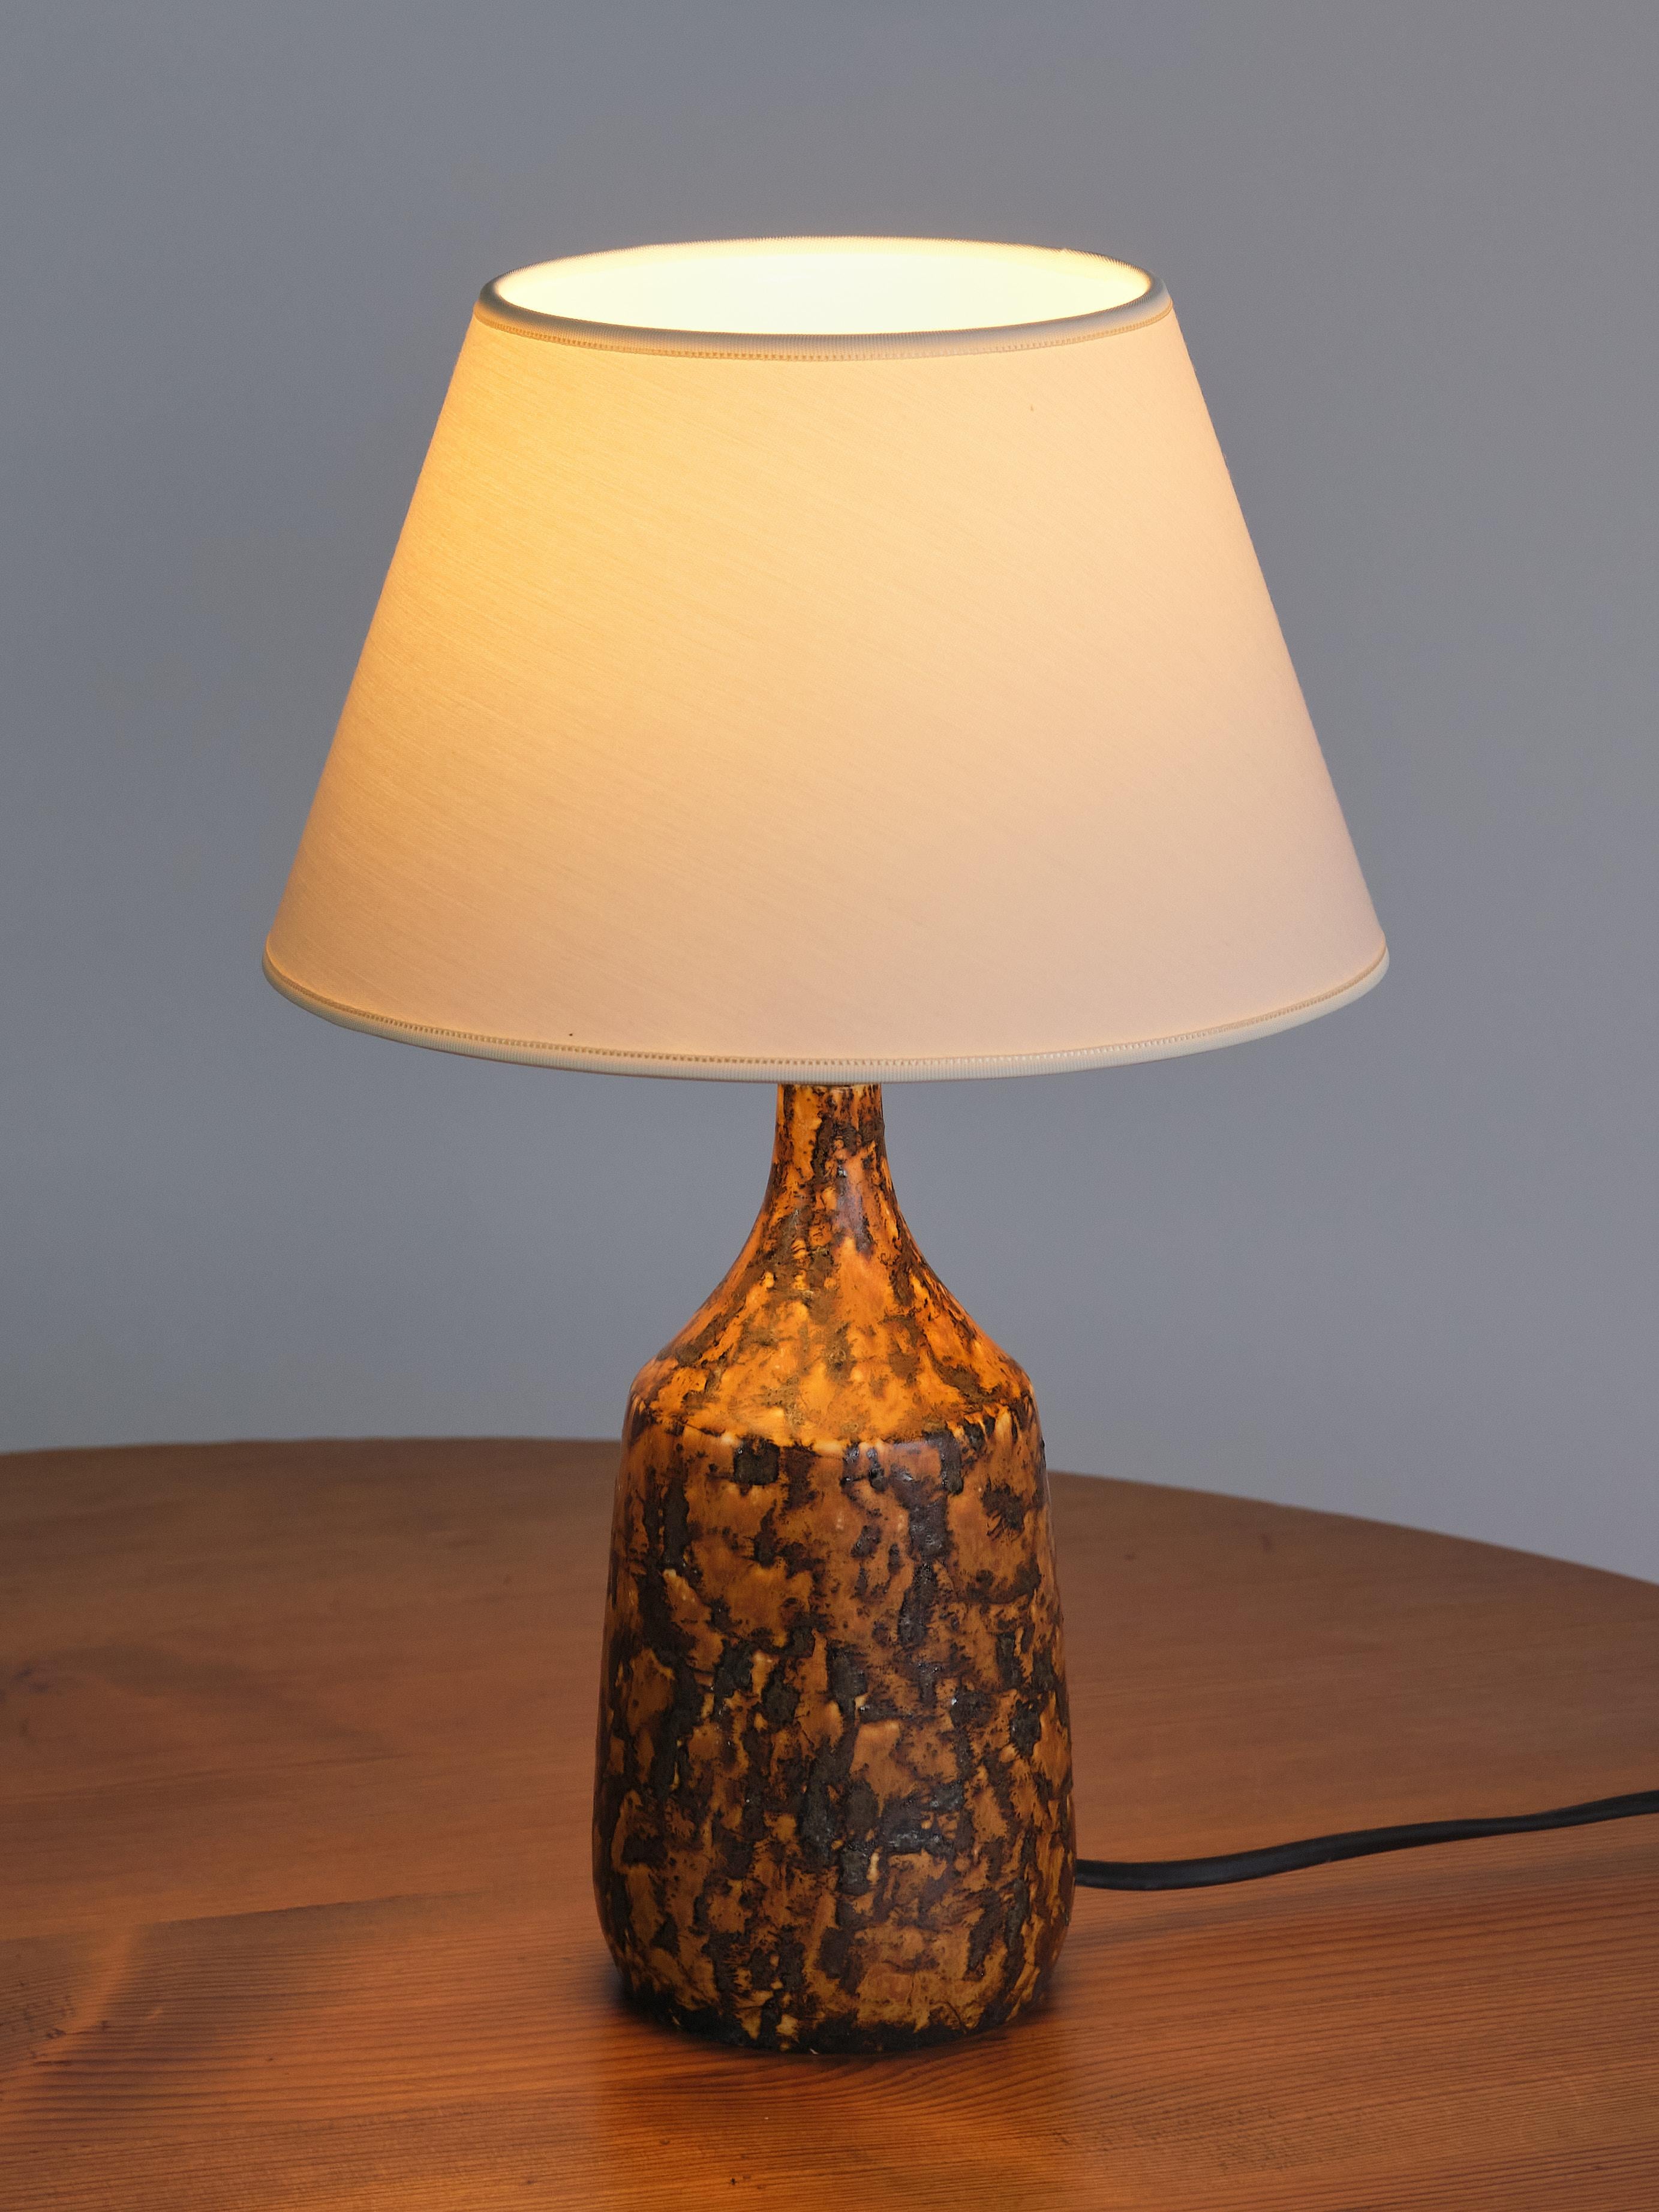 Pair of Gunnar Borg Glazed Stoneware Table Lamps, Höganäs, Sweden, 1960s For Sale 3